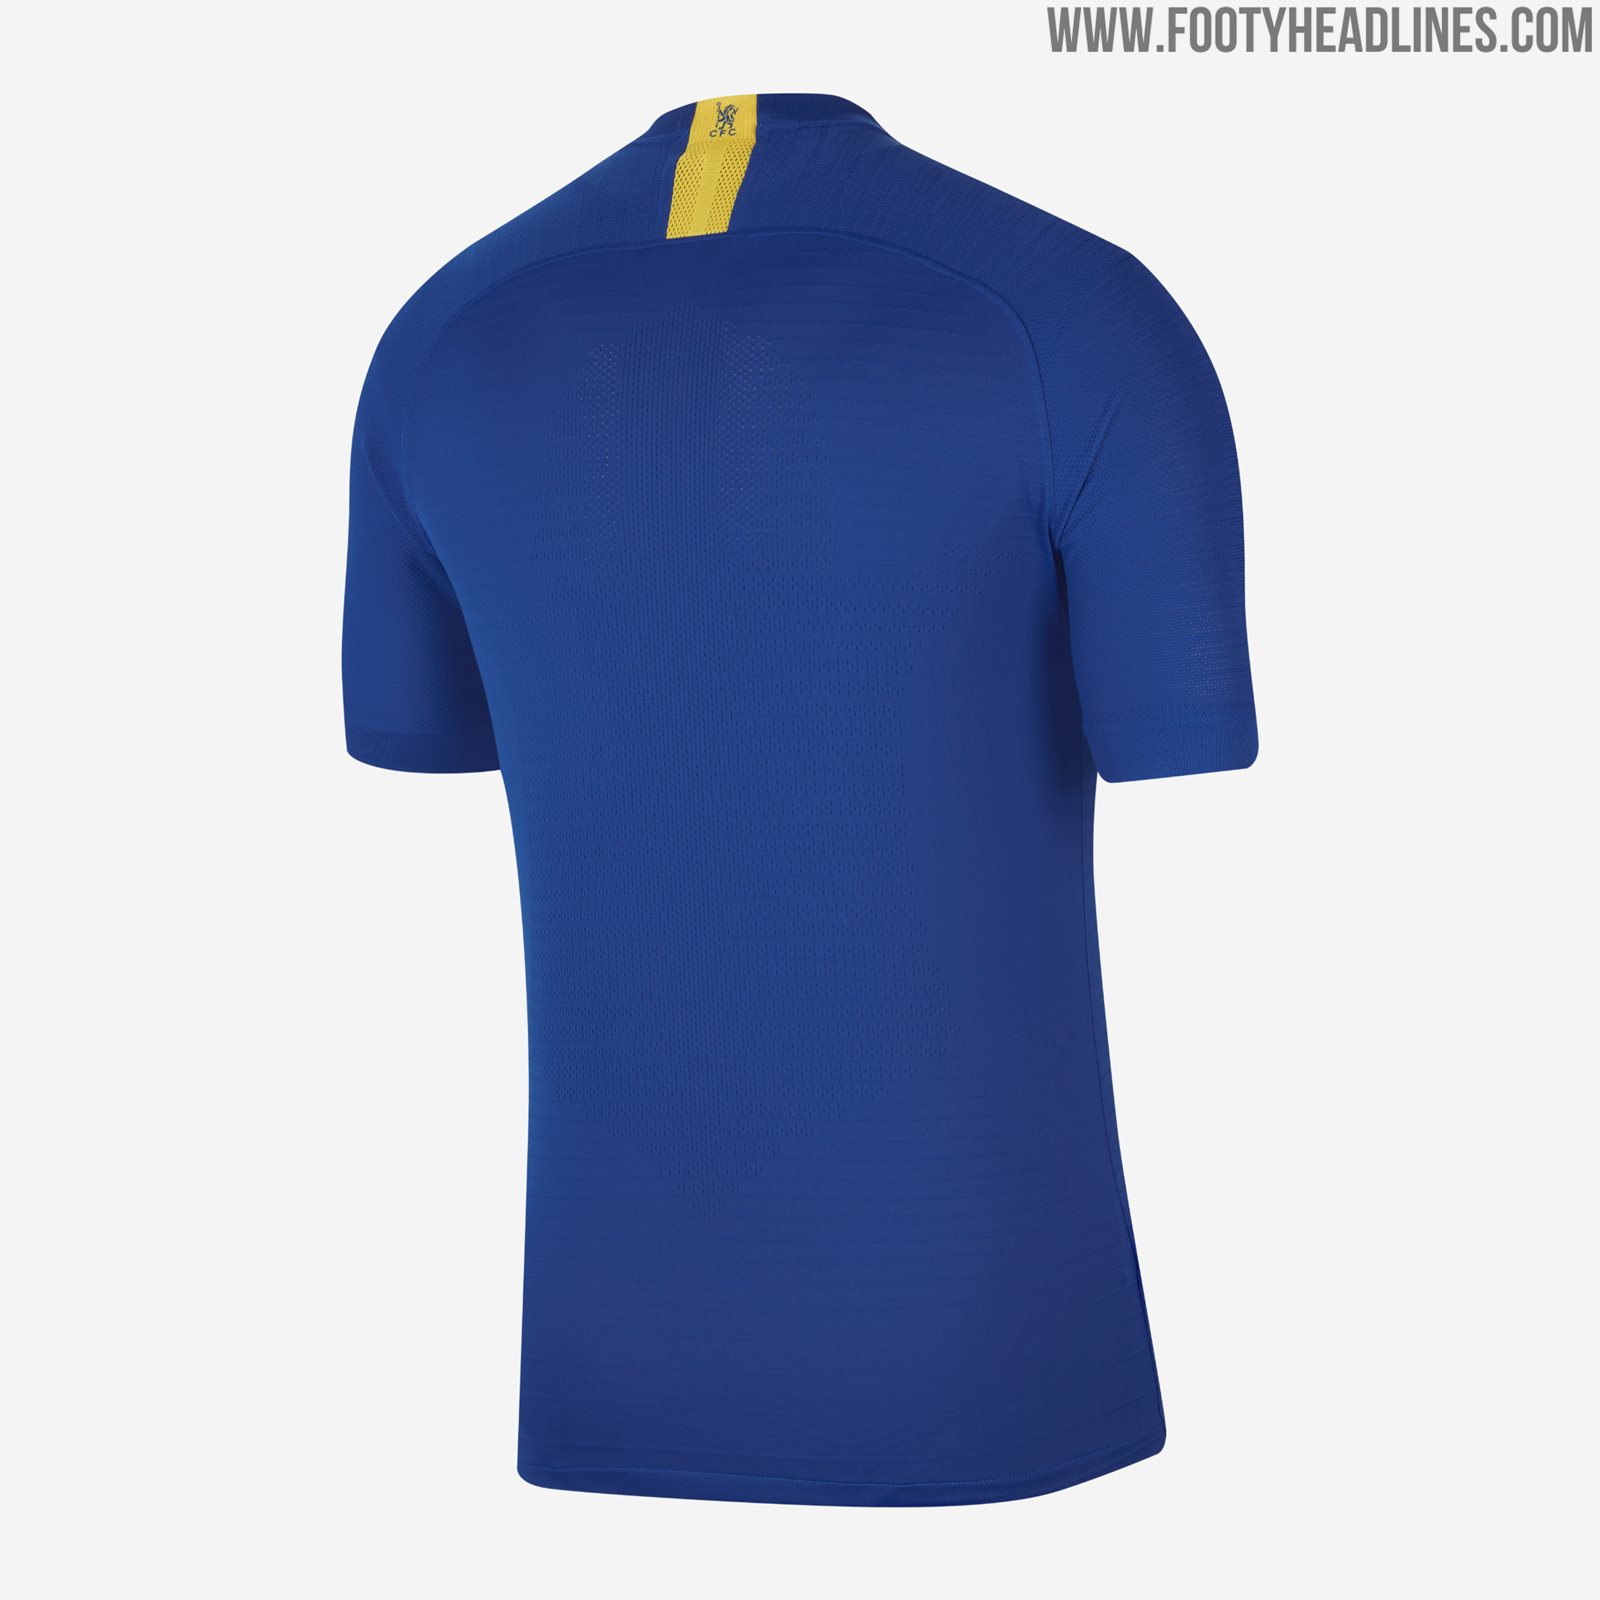 Now Available: Classy Nike Chelsea 19-20 Fourth Cup Kit Released ...